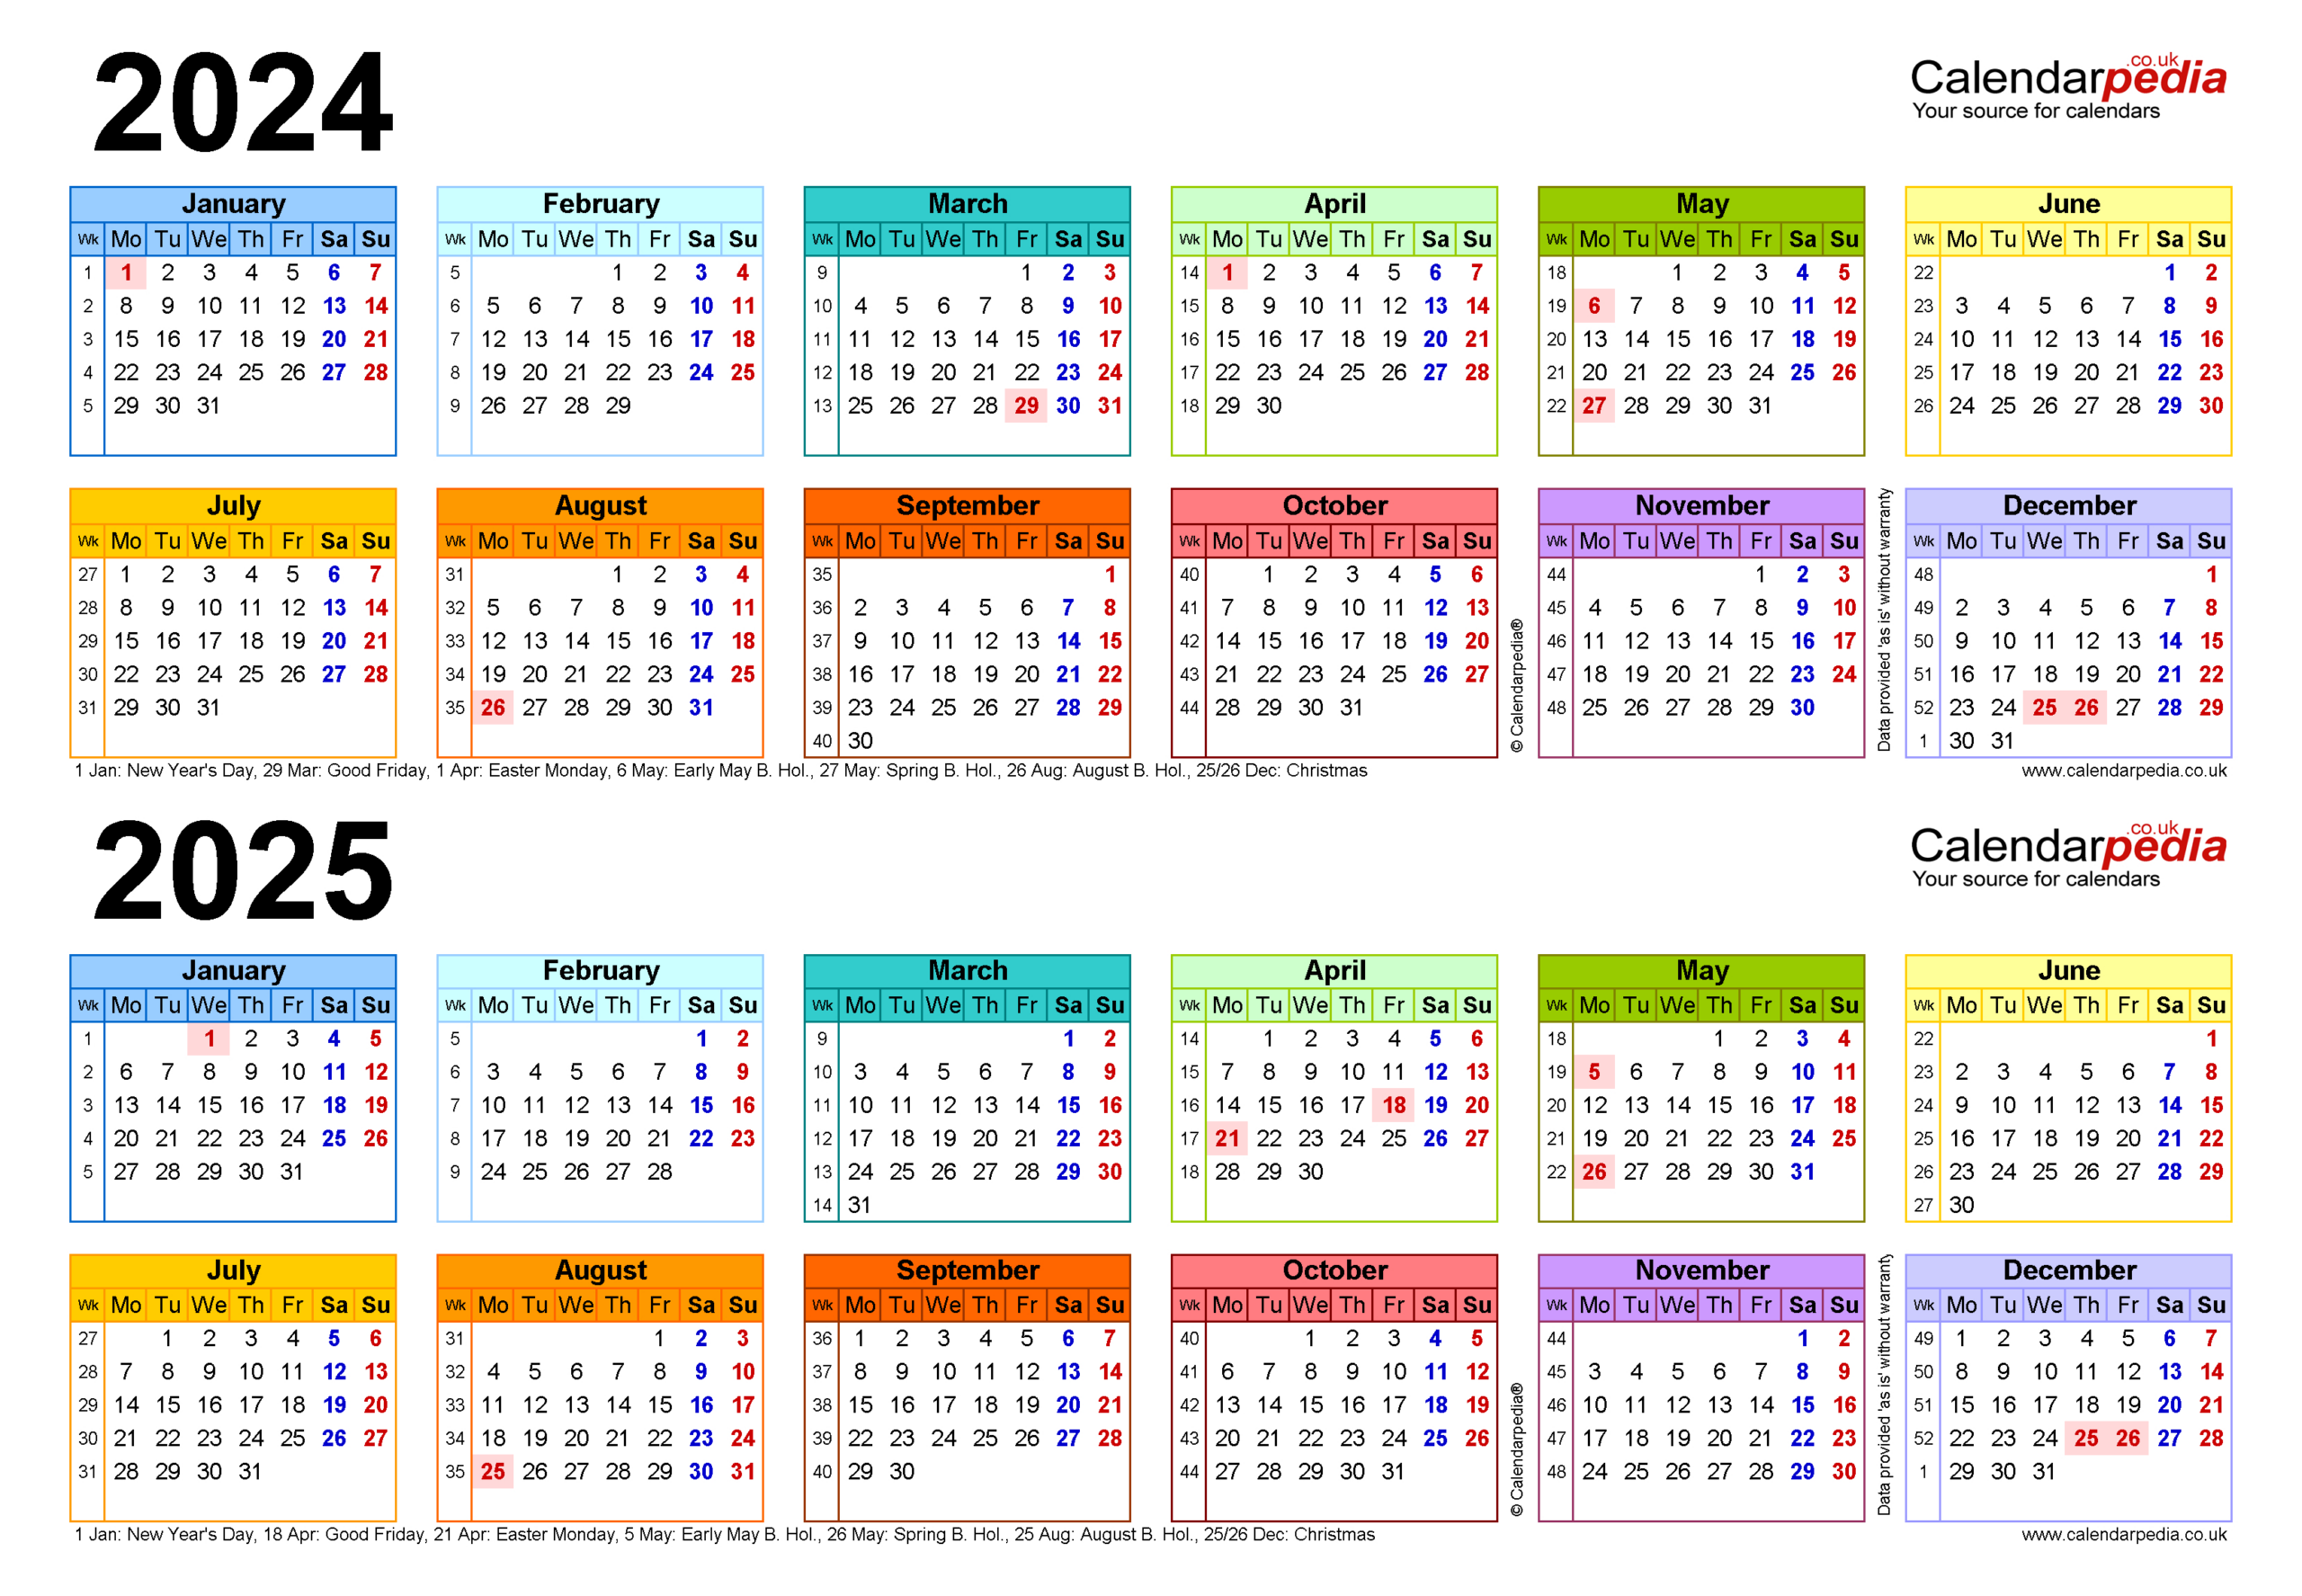 Two Year Calendars For 2024 And 2025 (Uk) For Pdf with regard to Free Printable Calendar 2024 And 2025